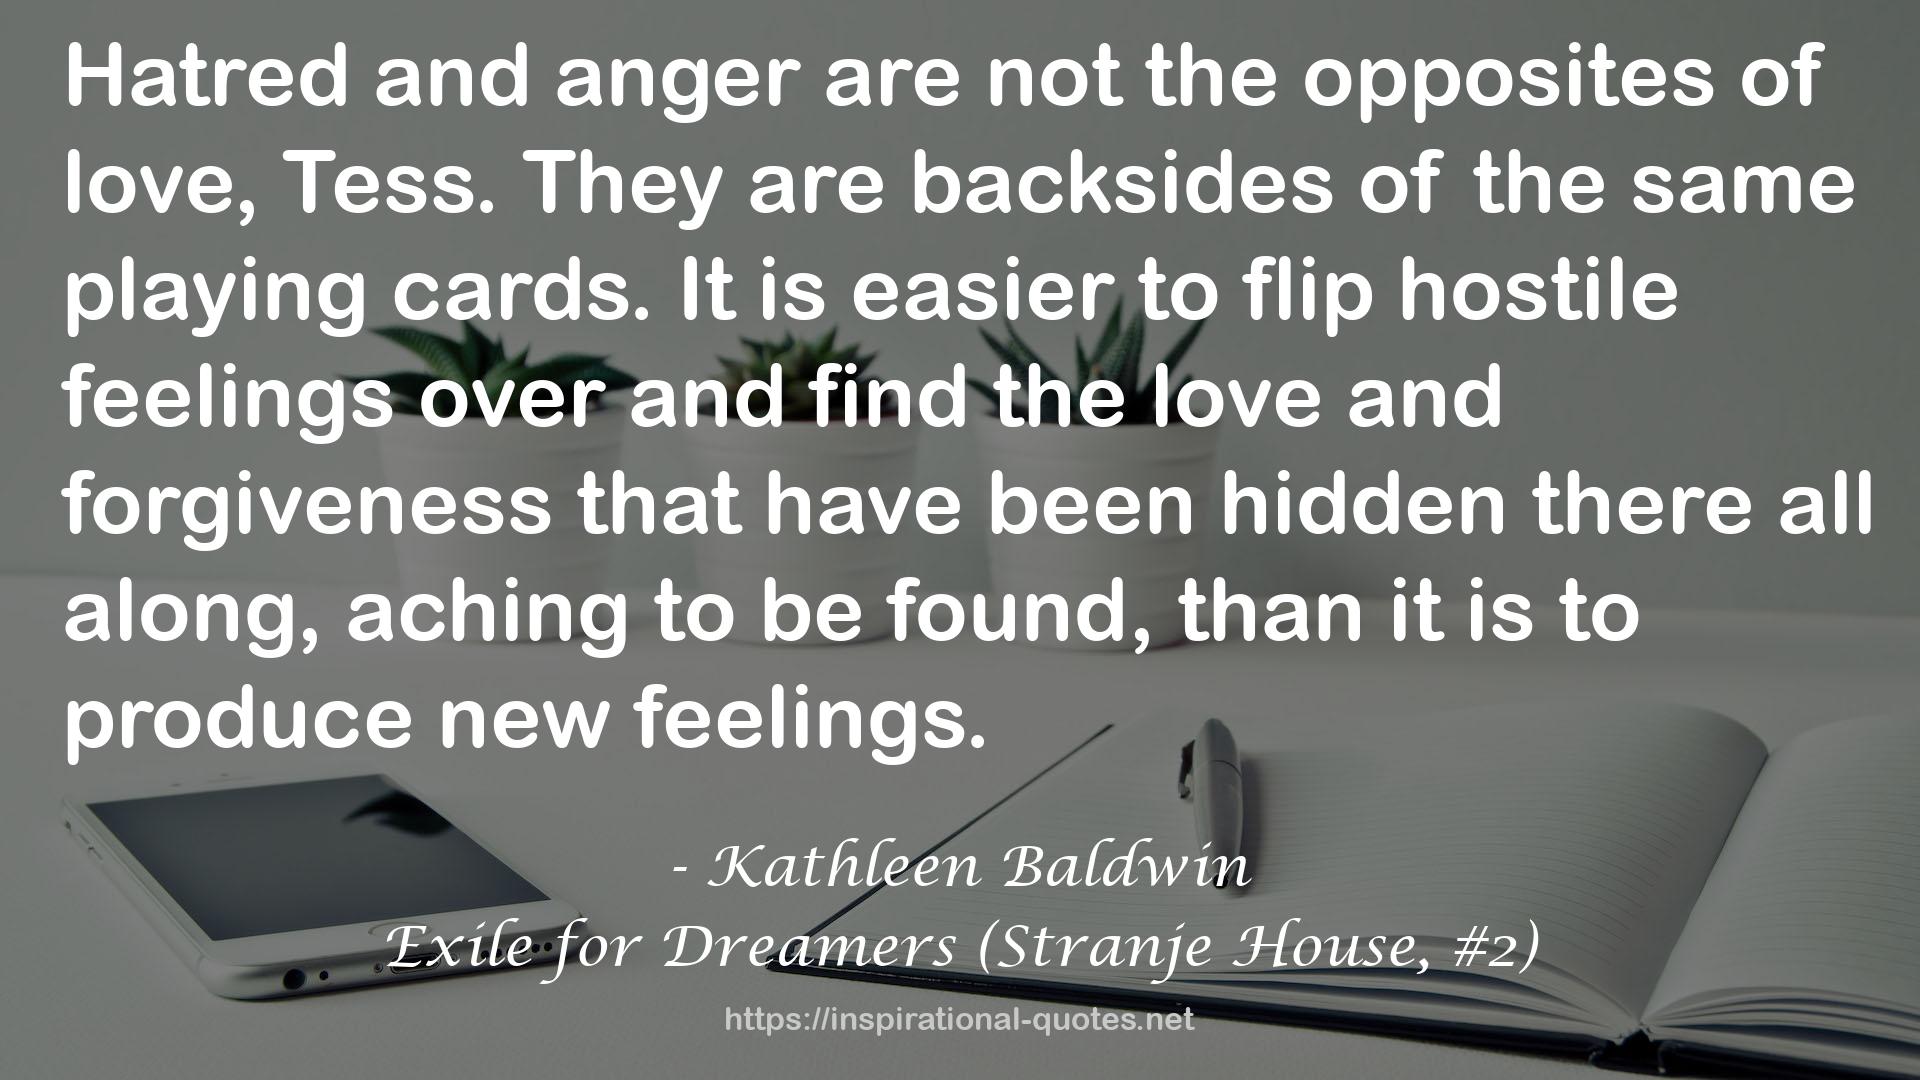 Exile for Dreamers (Stranje House, #2) QUOTES